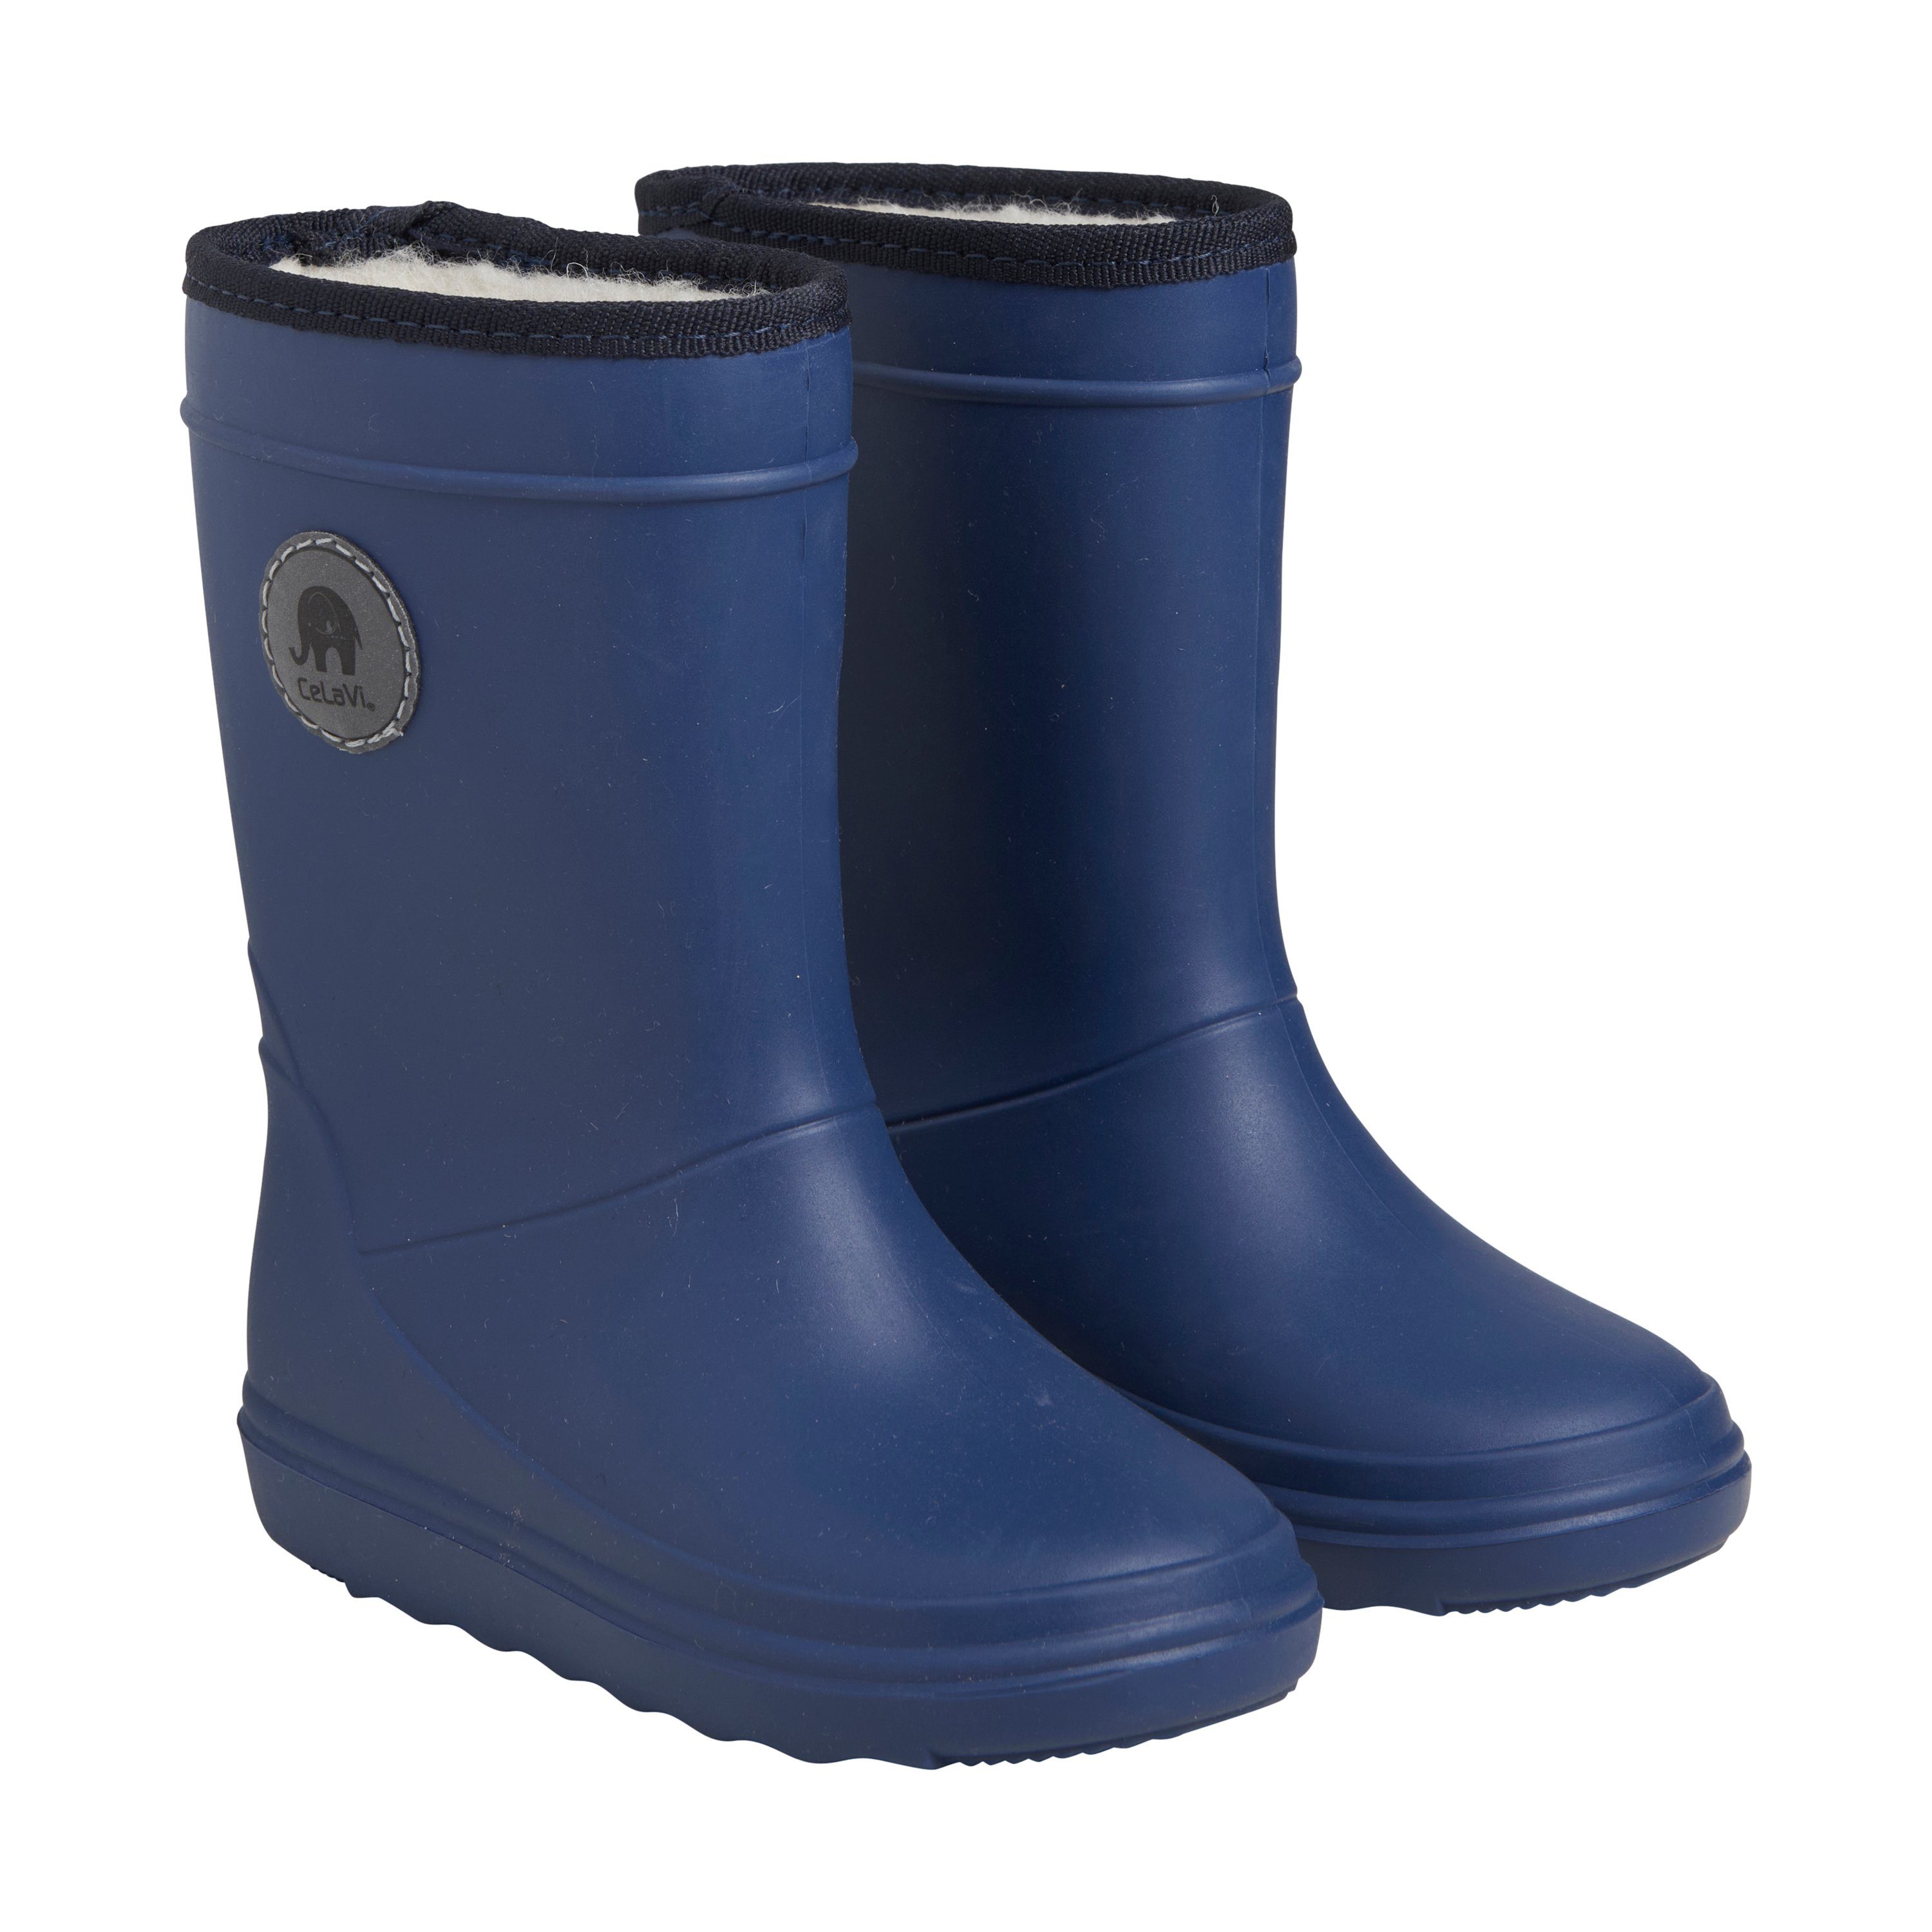 CeLaVi CEThermo Boots - 6274 Winterboots Pageant Blue (790) | Boots